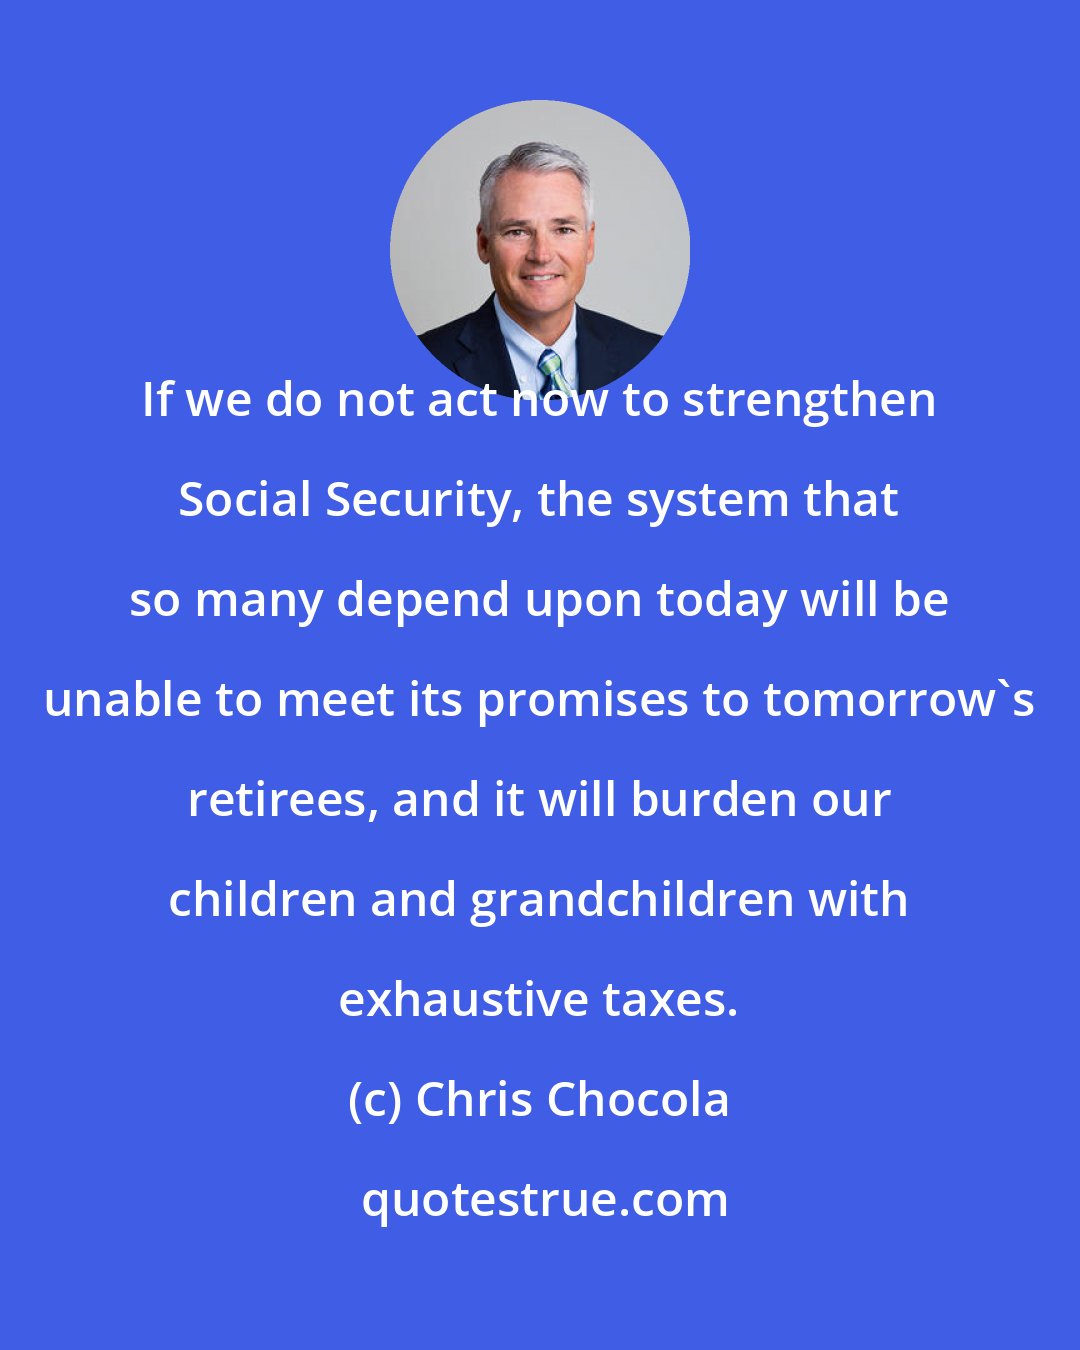 Chris Chocola: If we do not act now to strengthen Social Security, the system that so many depend upon today will be unable to meet its promises to tomorrow's retirees, and it will burden our children and grandchildren with exhaustive taxes.